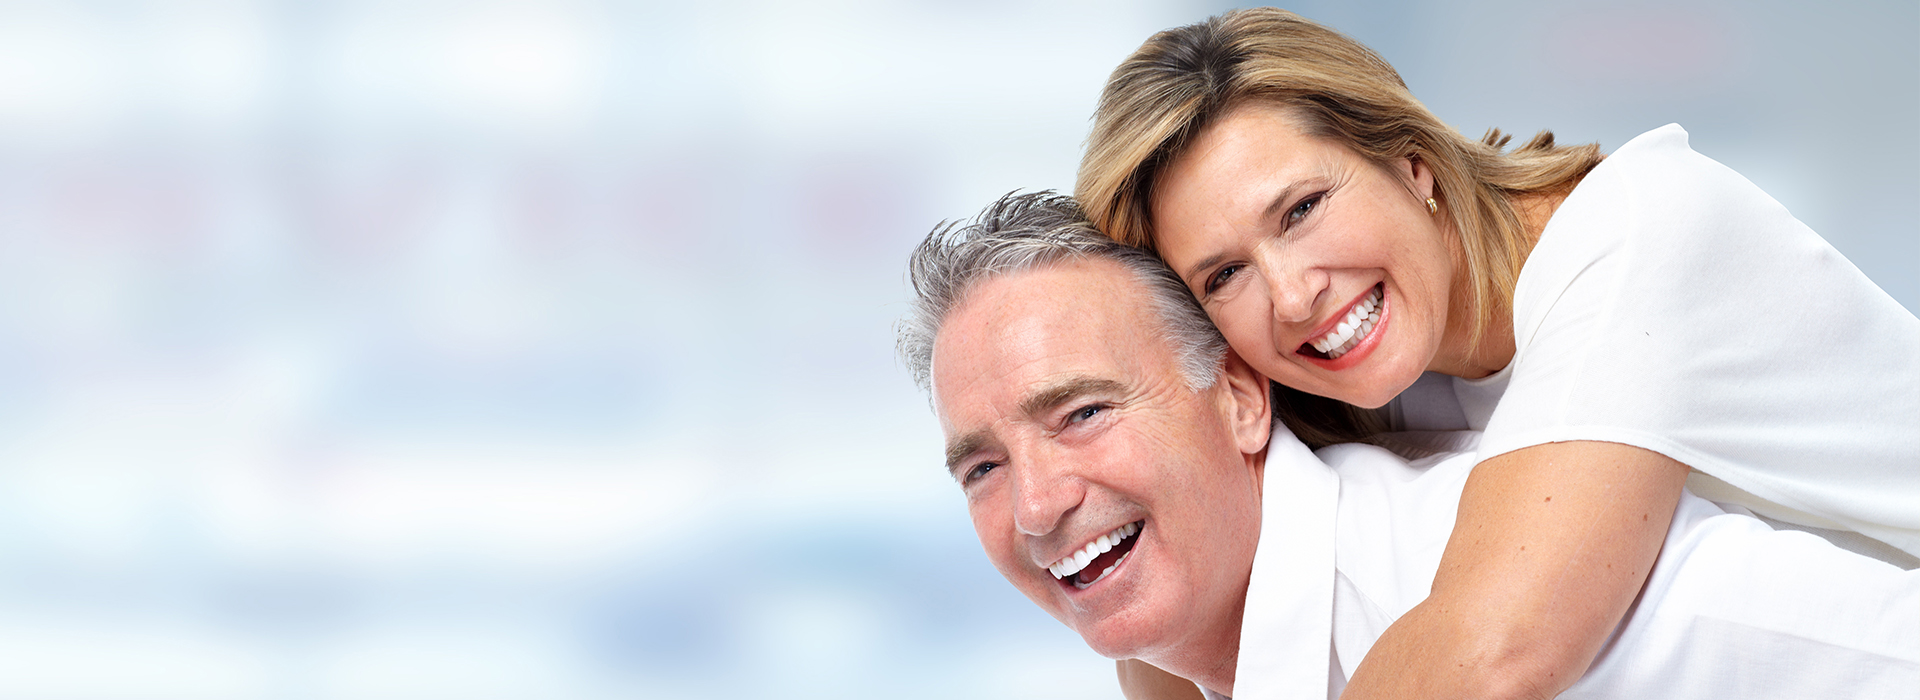 Schneider Family   Cosmetic Dentistry | Extractions, Sports Mouthguards and TMJ Disorders